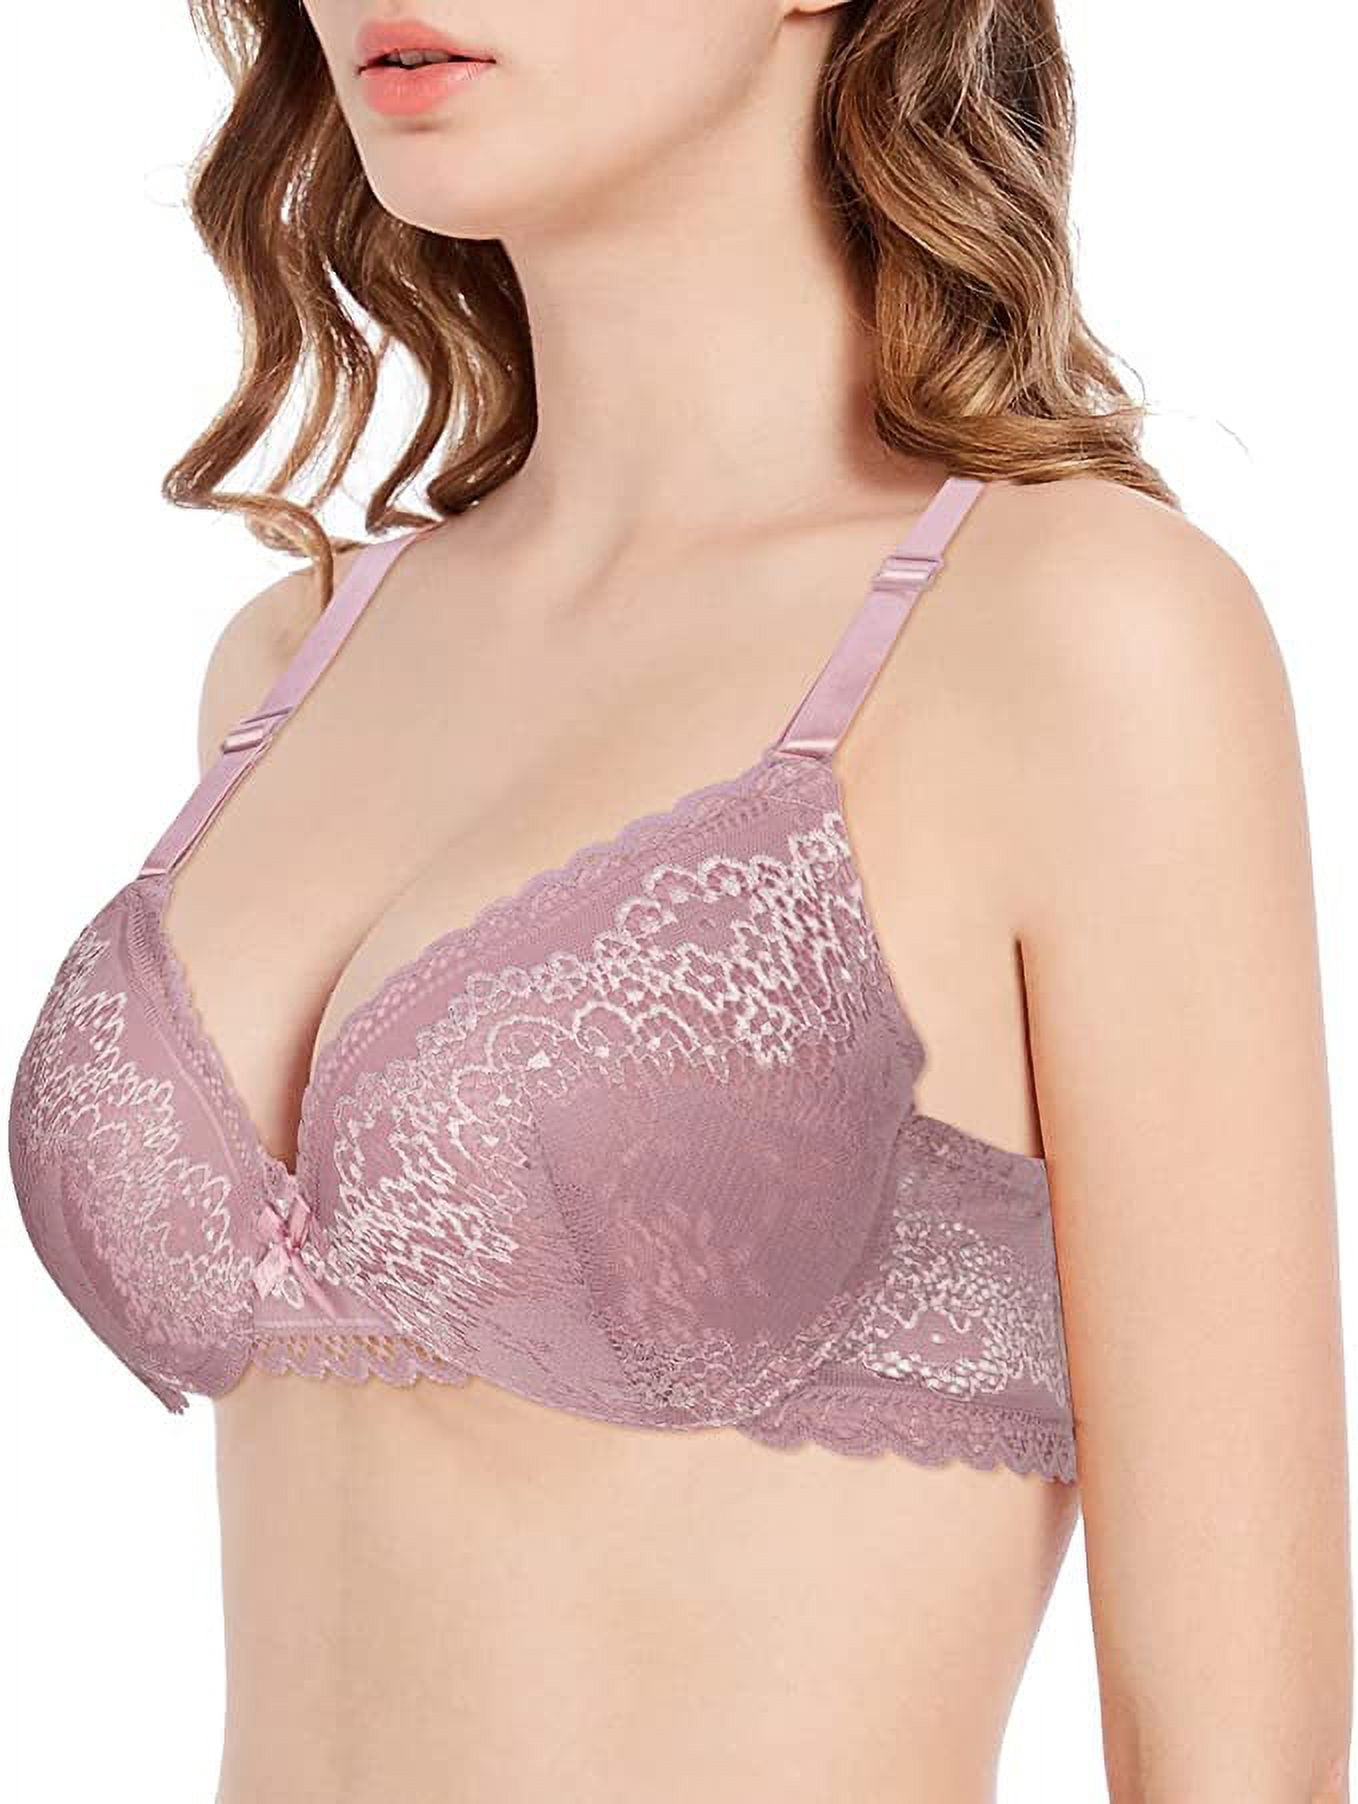 GAI YI 6Pack Lace Bras Push Up Padded Contour Full Coverage Underwire  Everyday Bras for women B-32B 